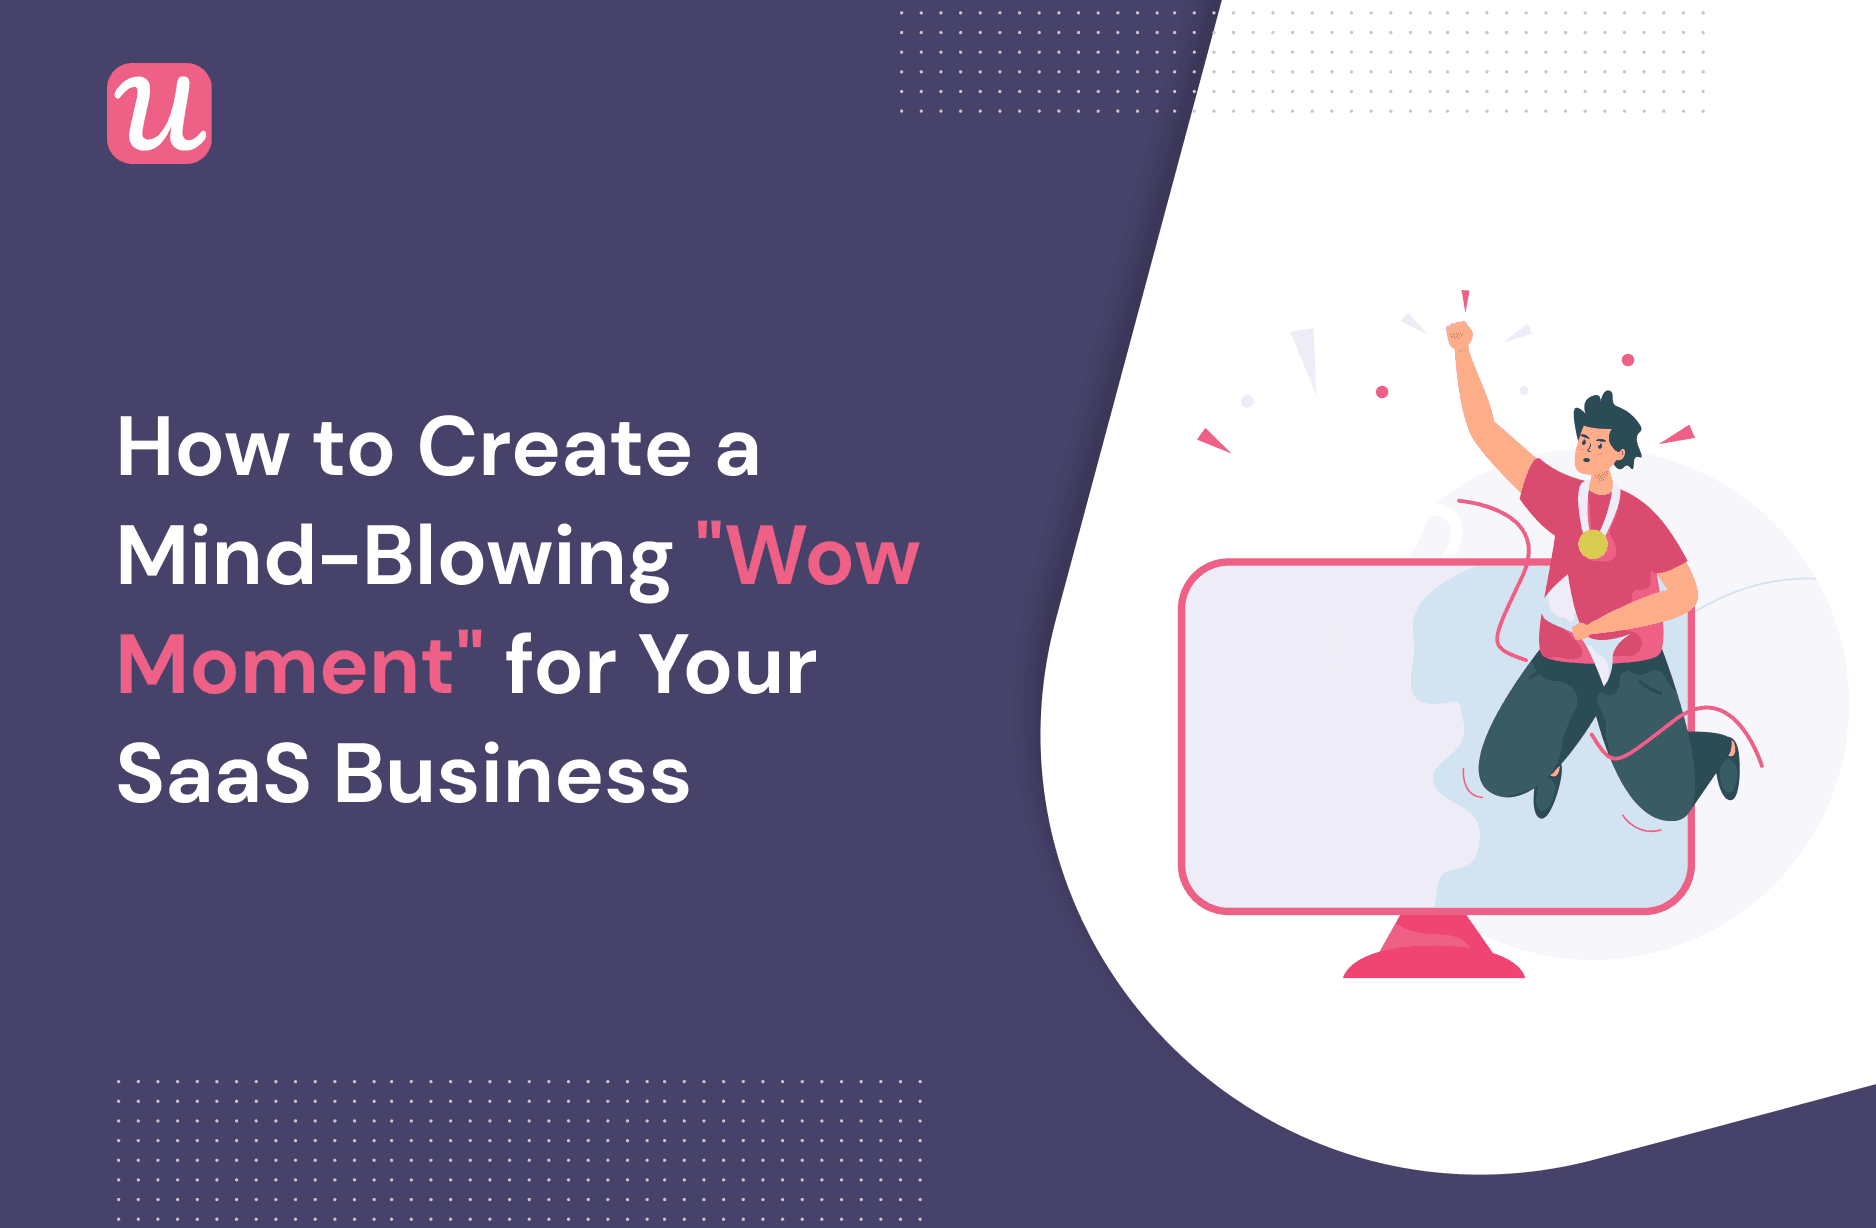 How to Create a Mind-Blowing "Wow Moment" for Your SaaS Business